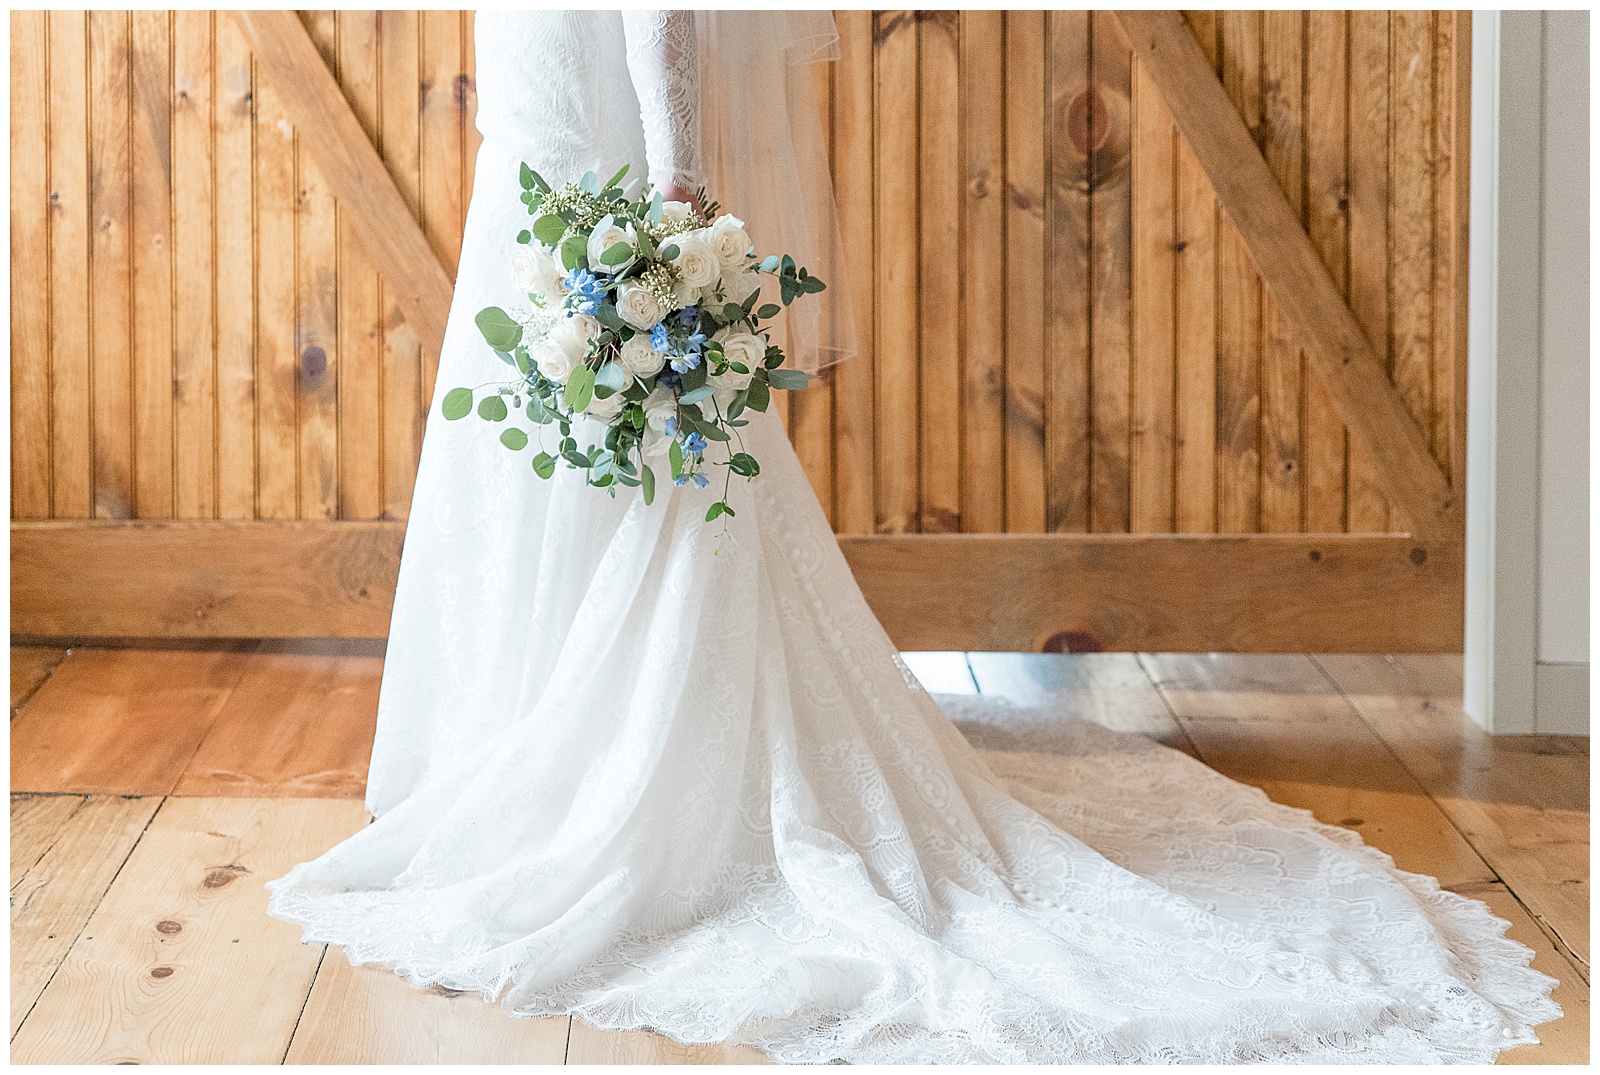 bridal gown train and bride's bouquet by wooden barn door at mill at manor falls